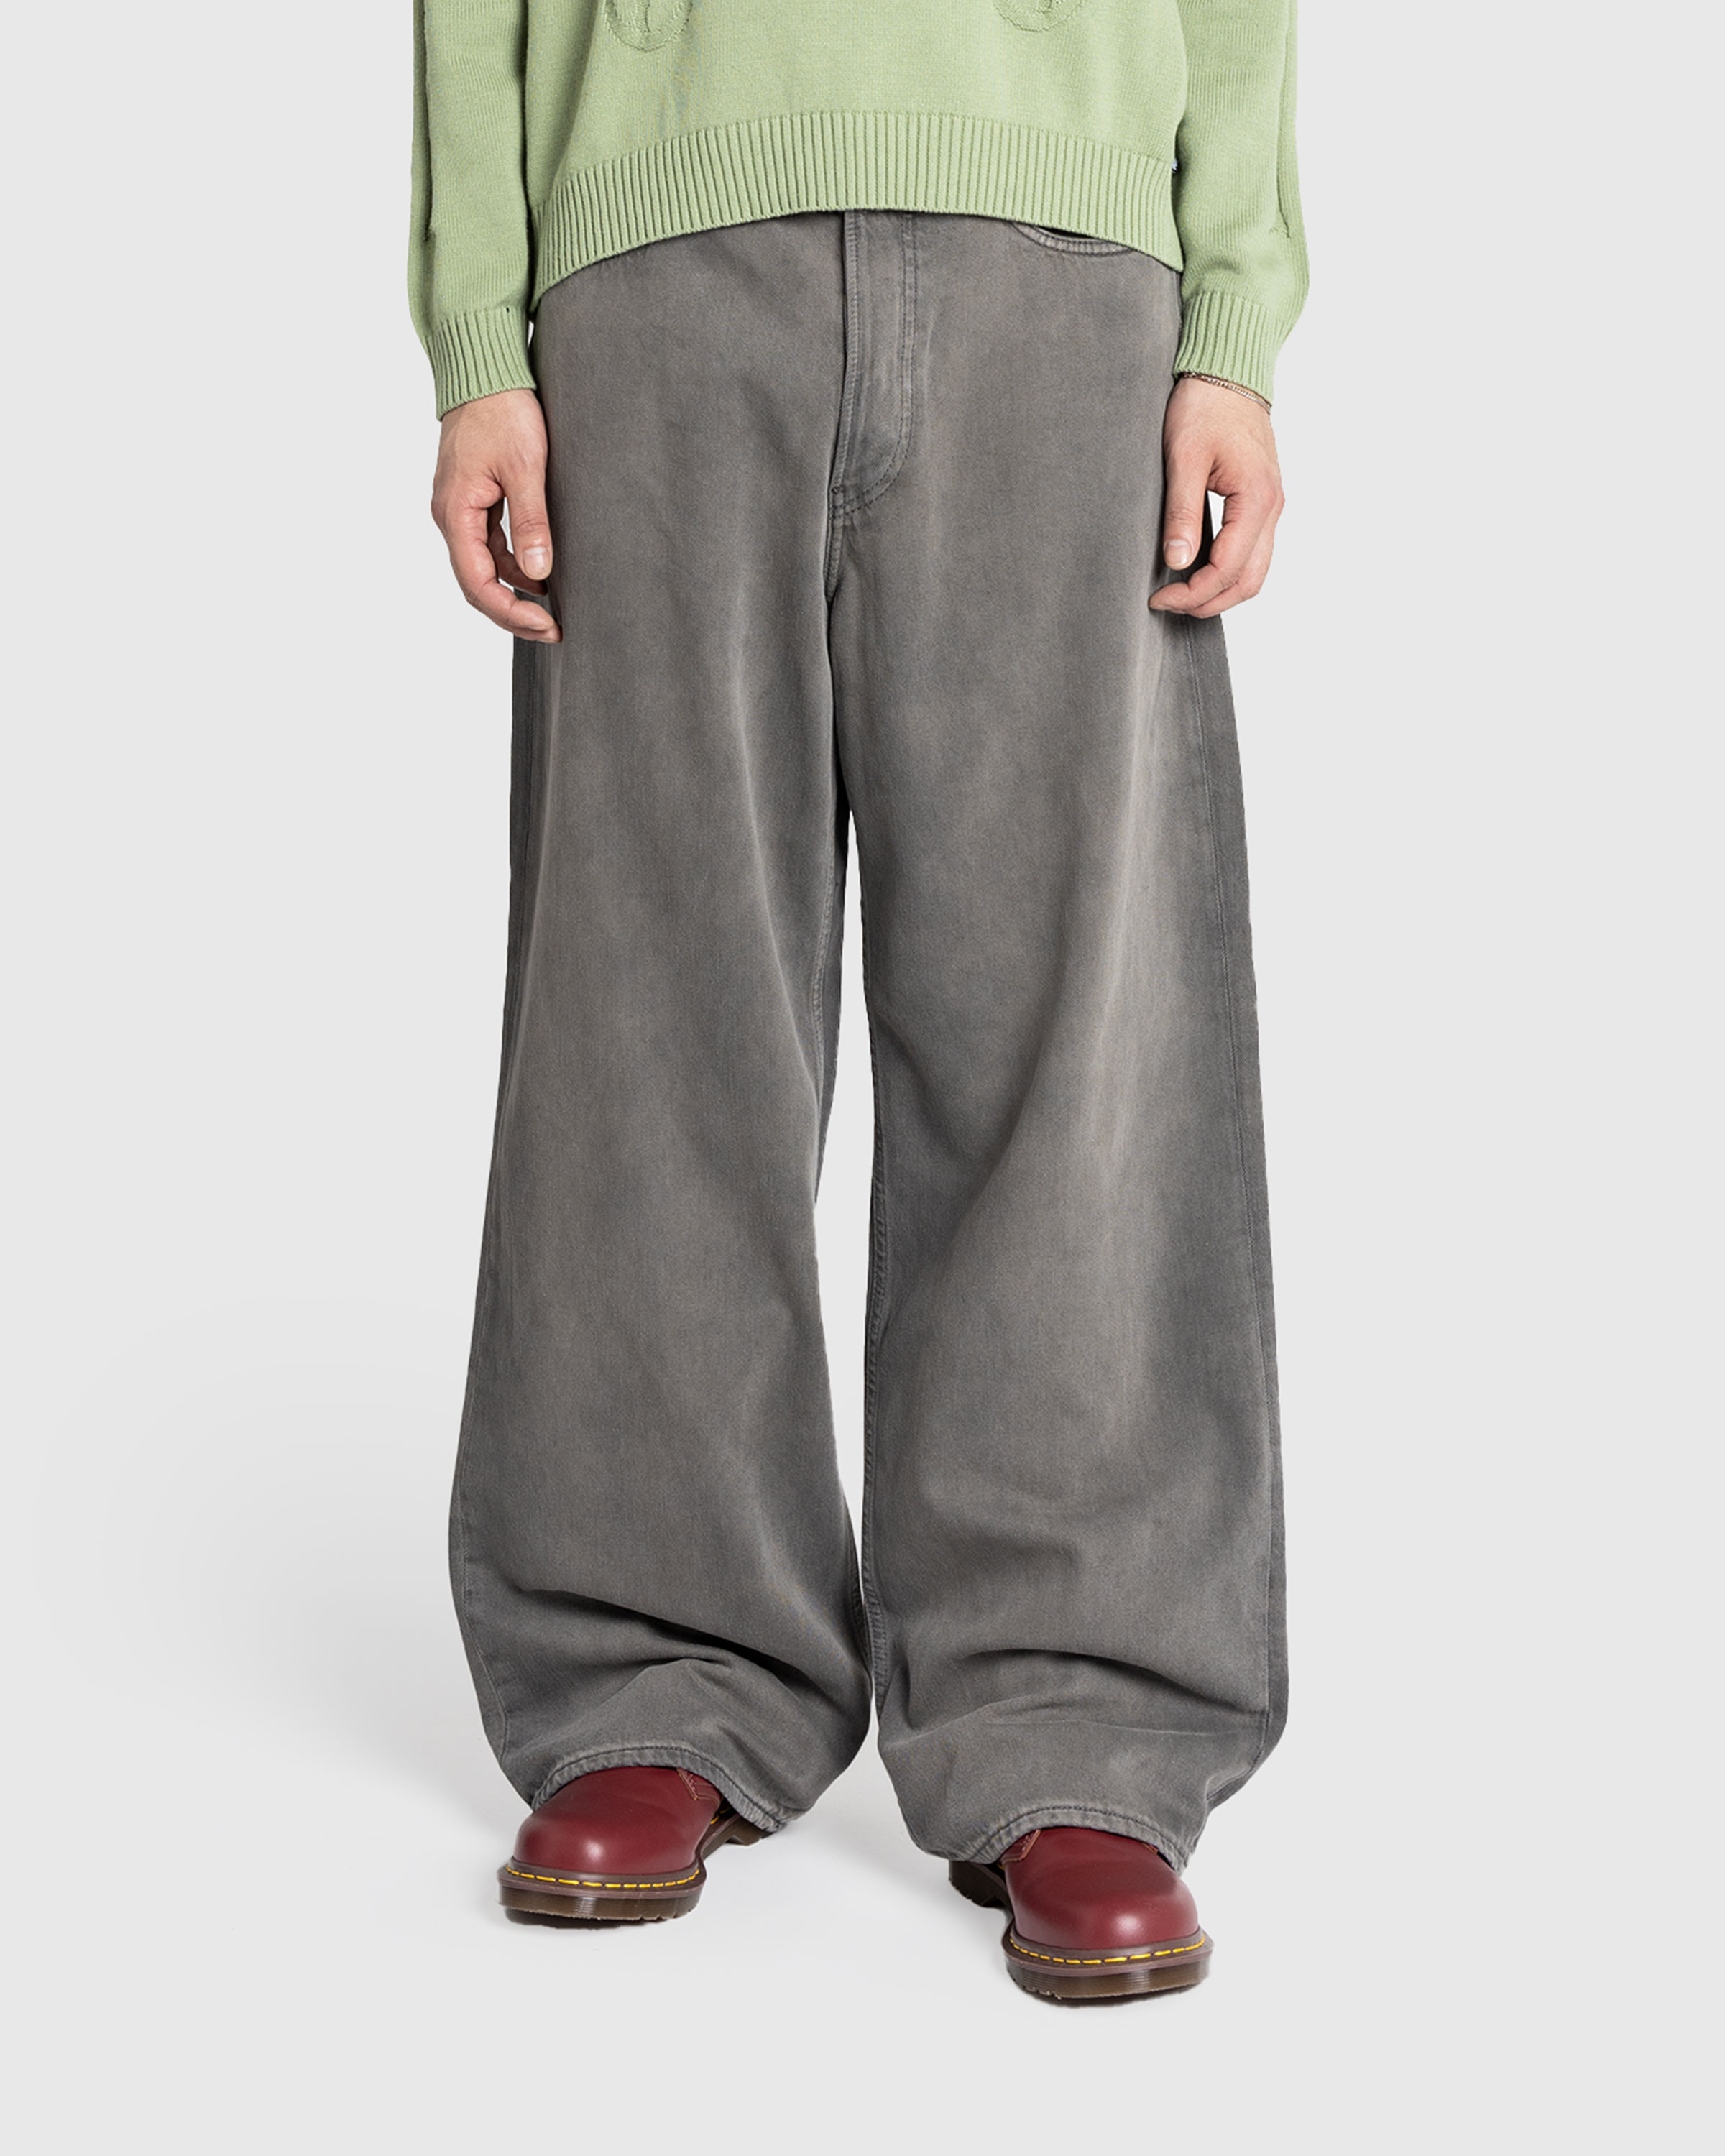 Acne Studios – Loose Fit Jeans 1981M Anthracite Grey - Pants - Grey - Image 2